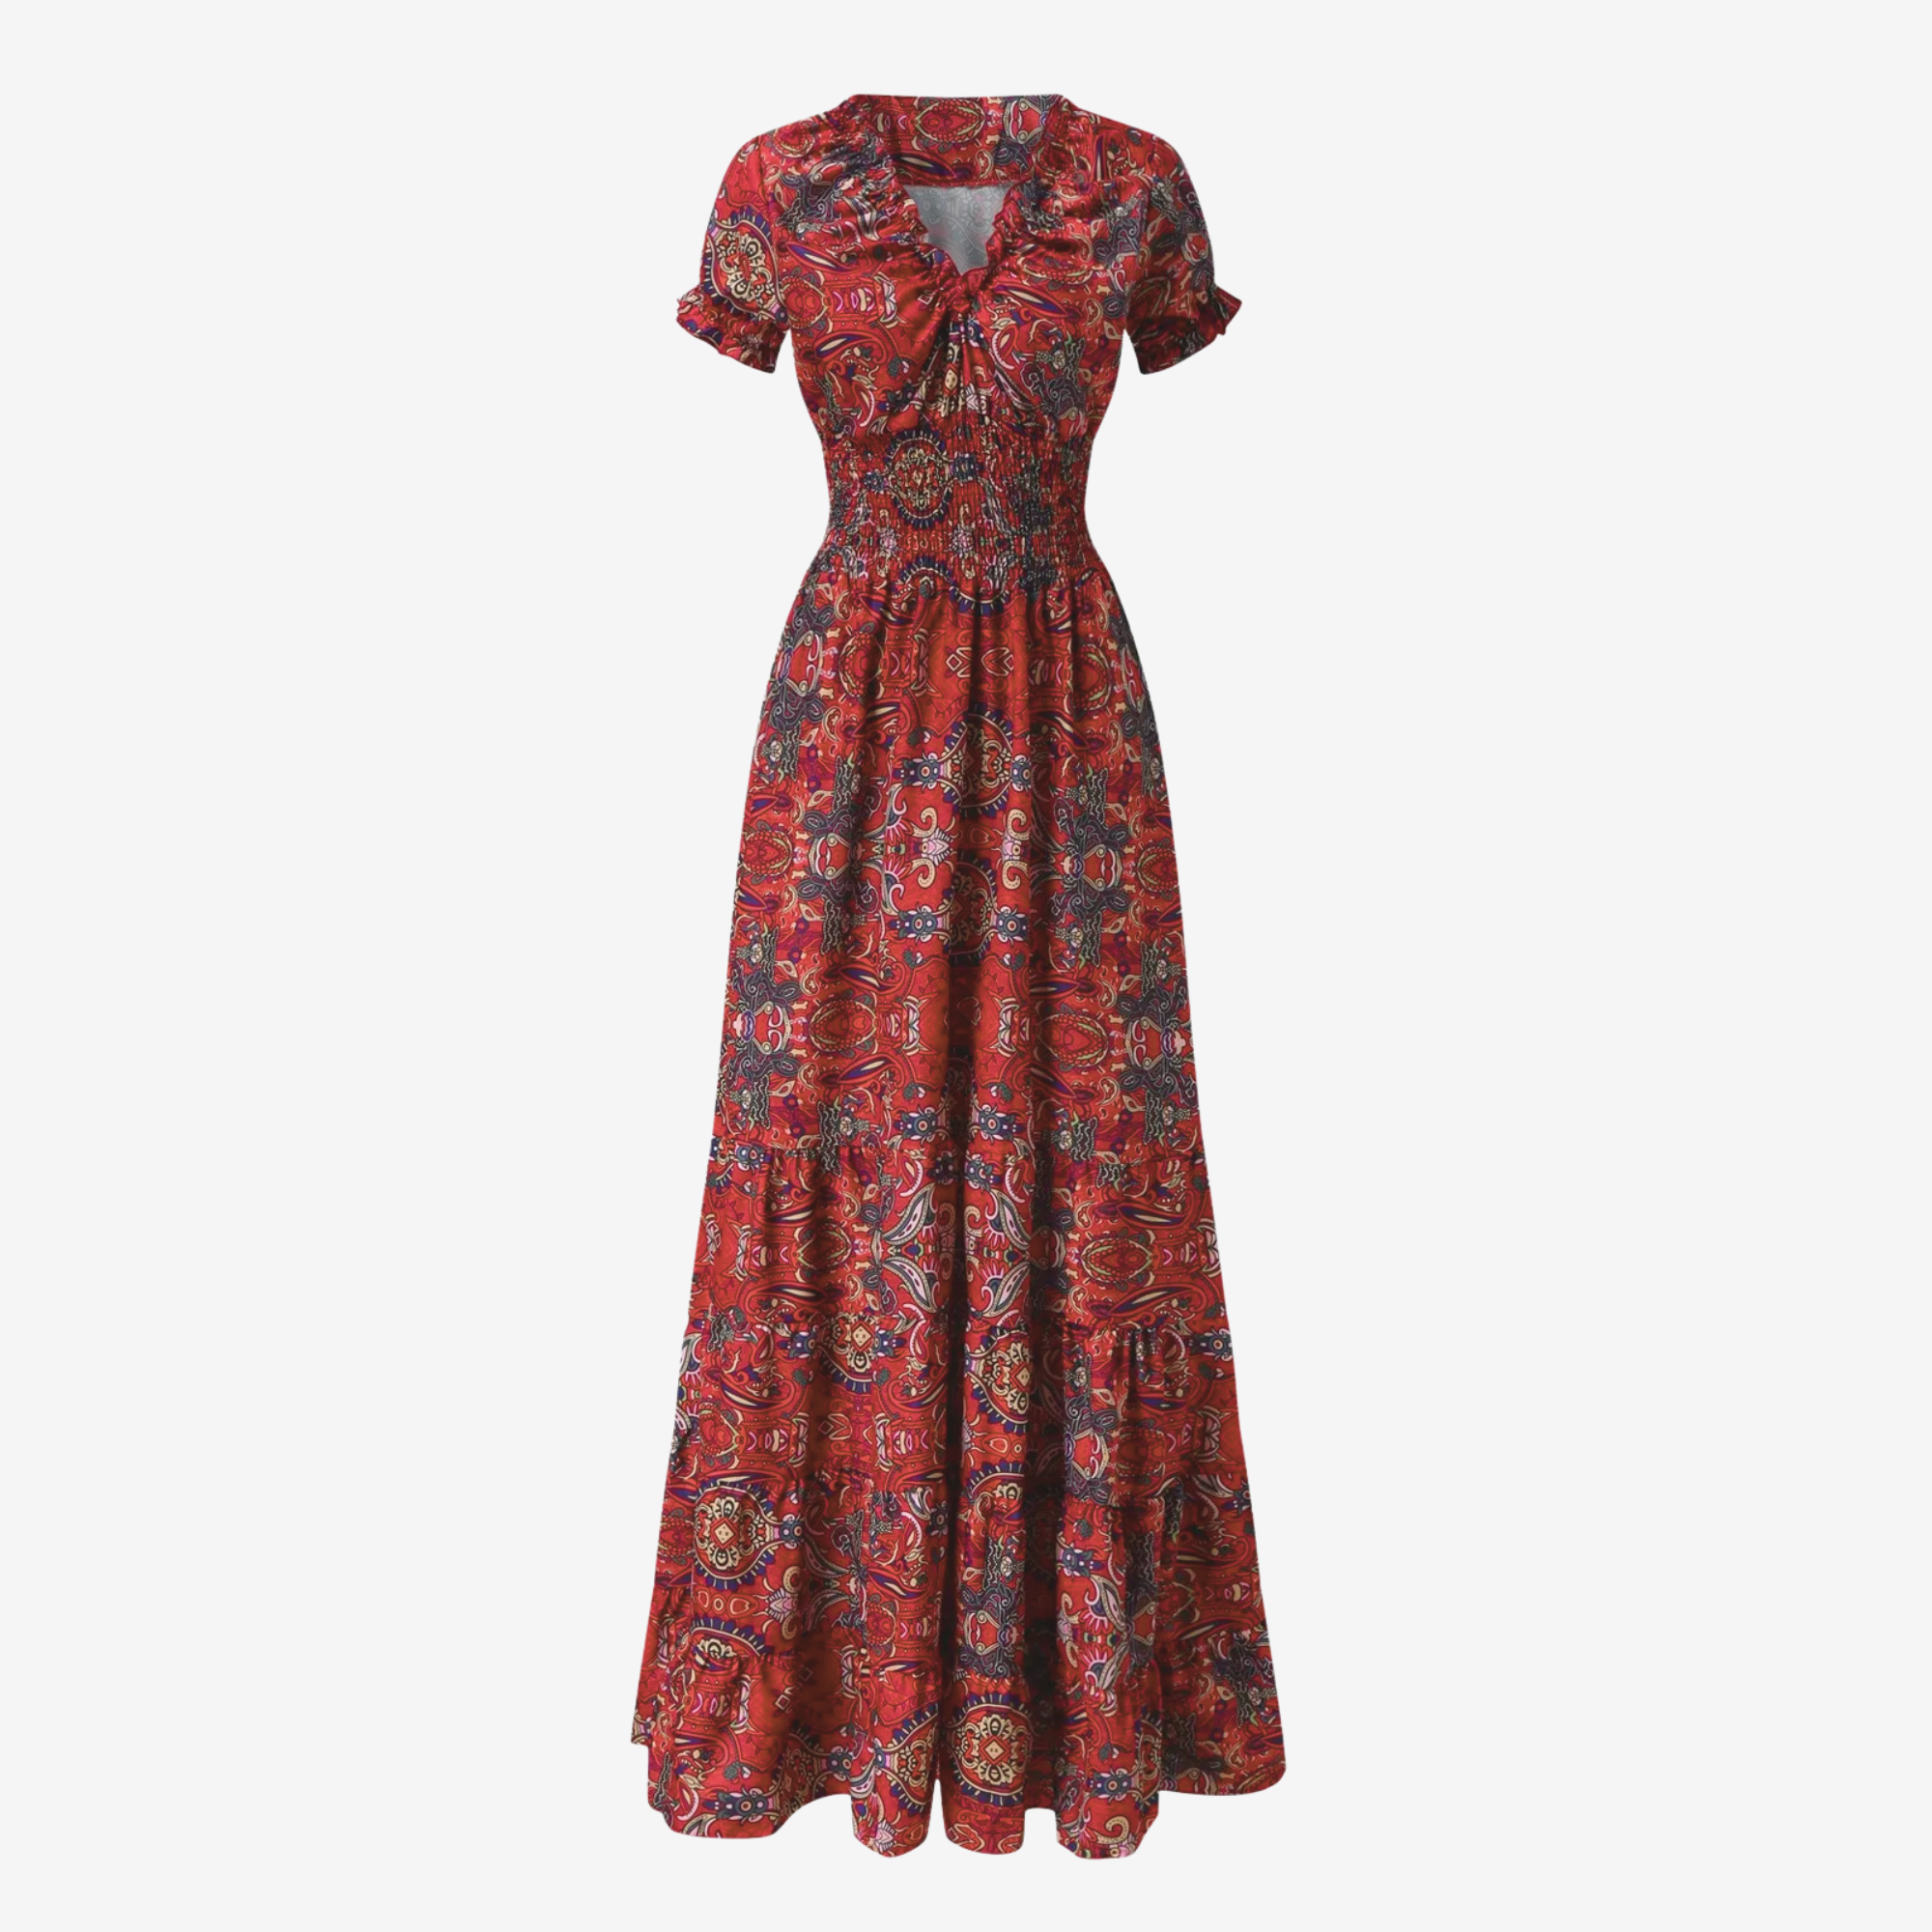 The Gypsy Nest Bohemian Wine Red Paisley Print Tiered Casual Summer Maxi Dress